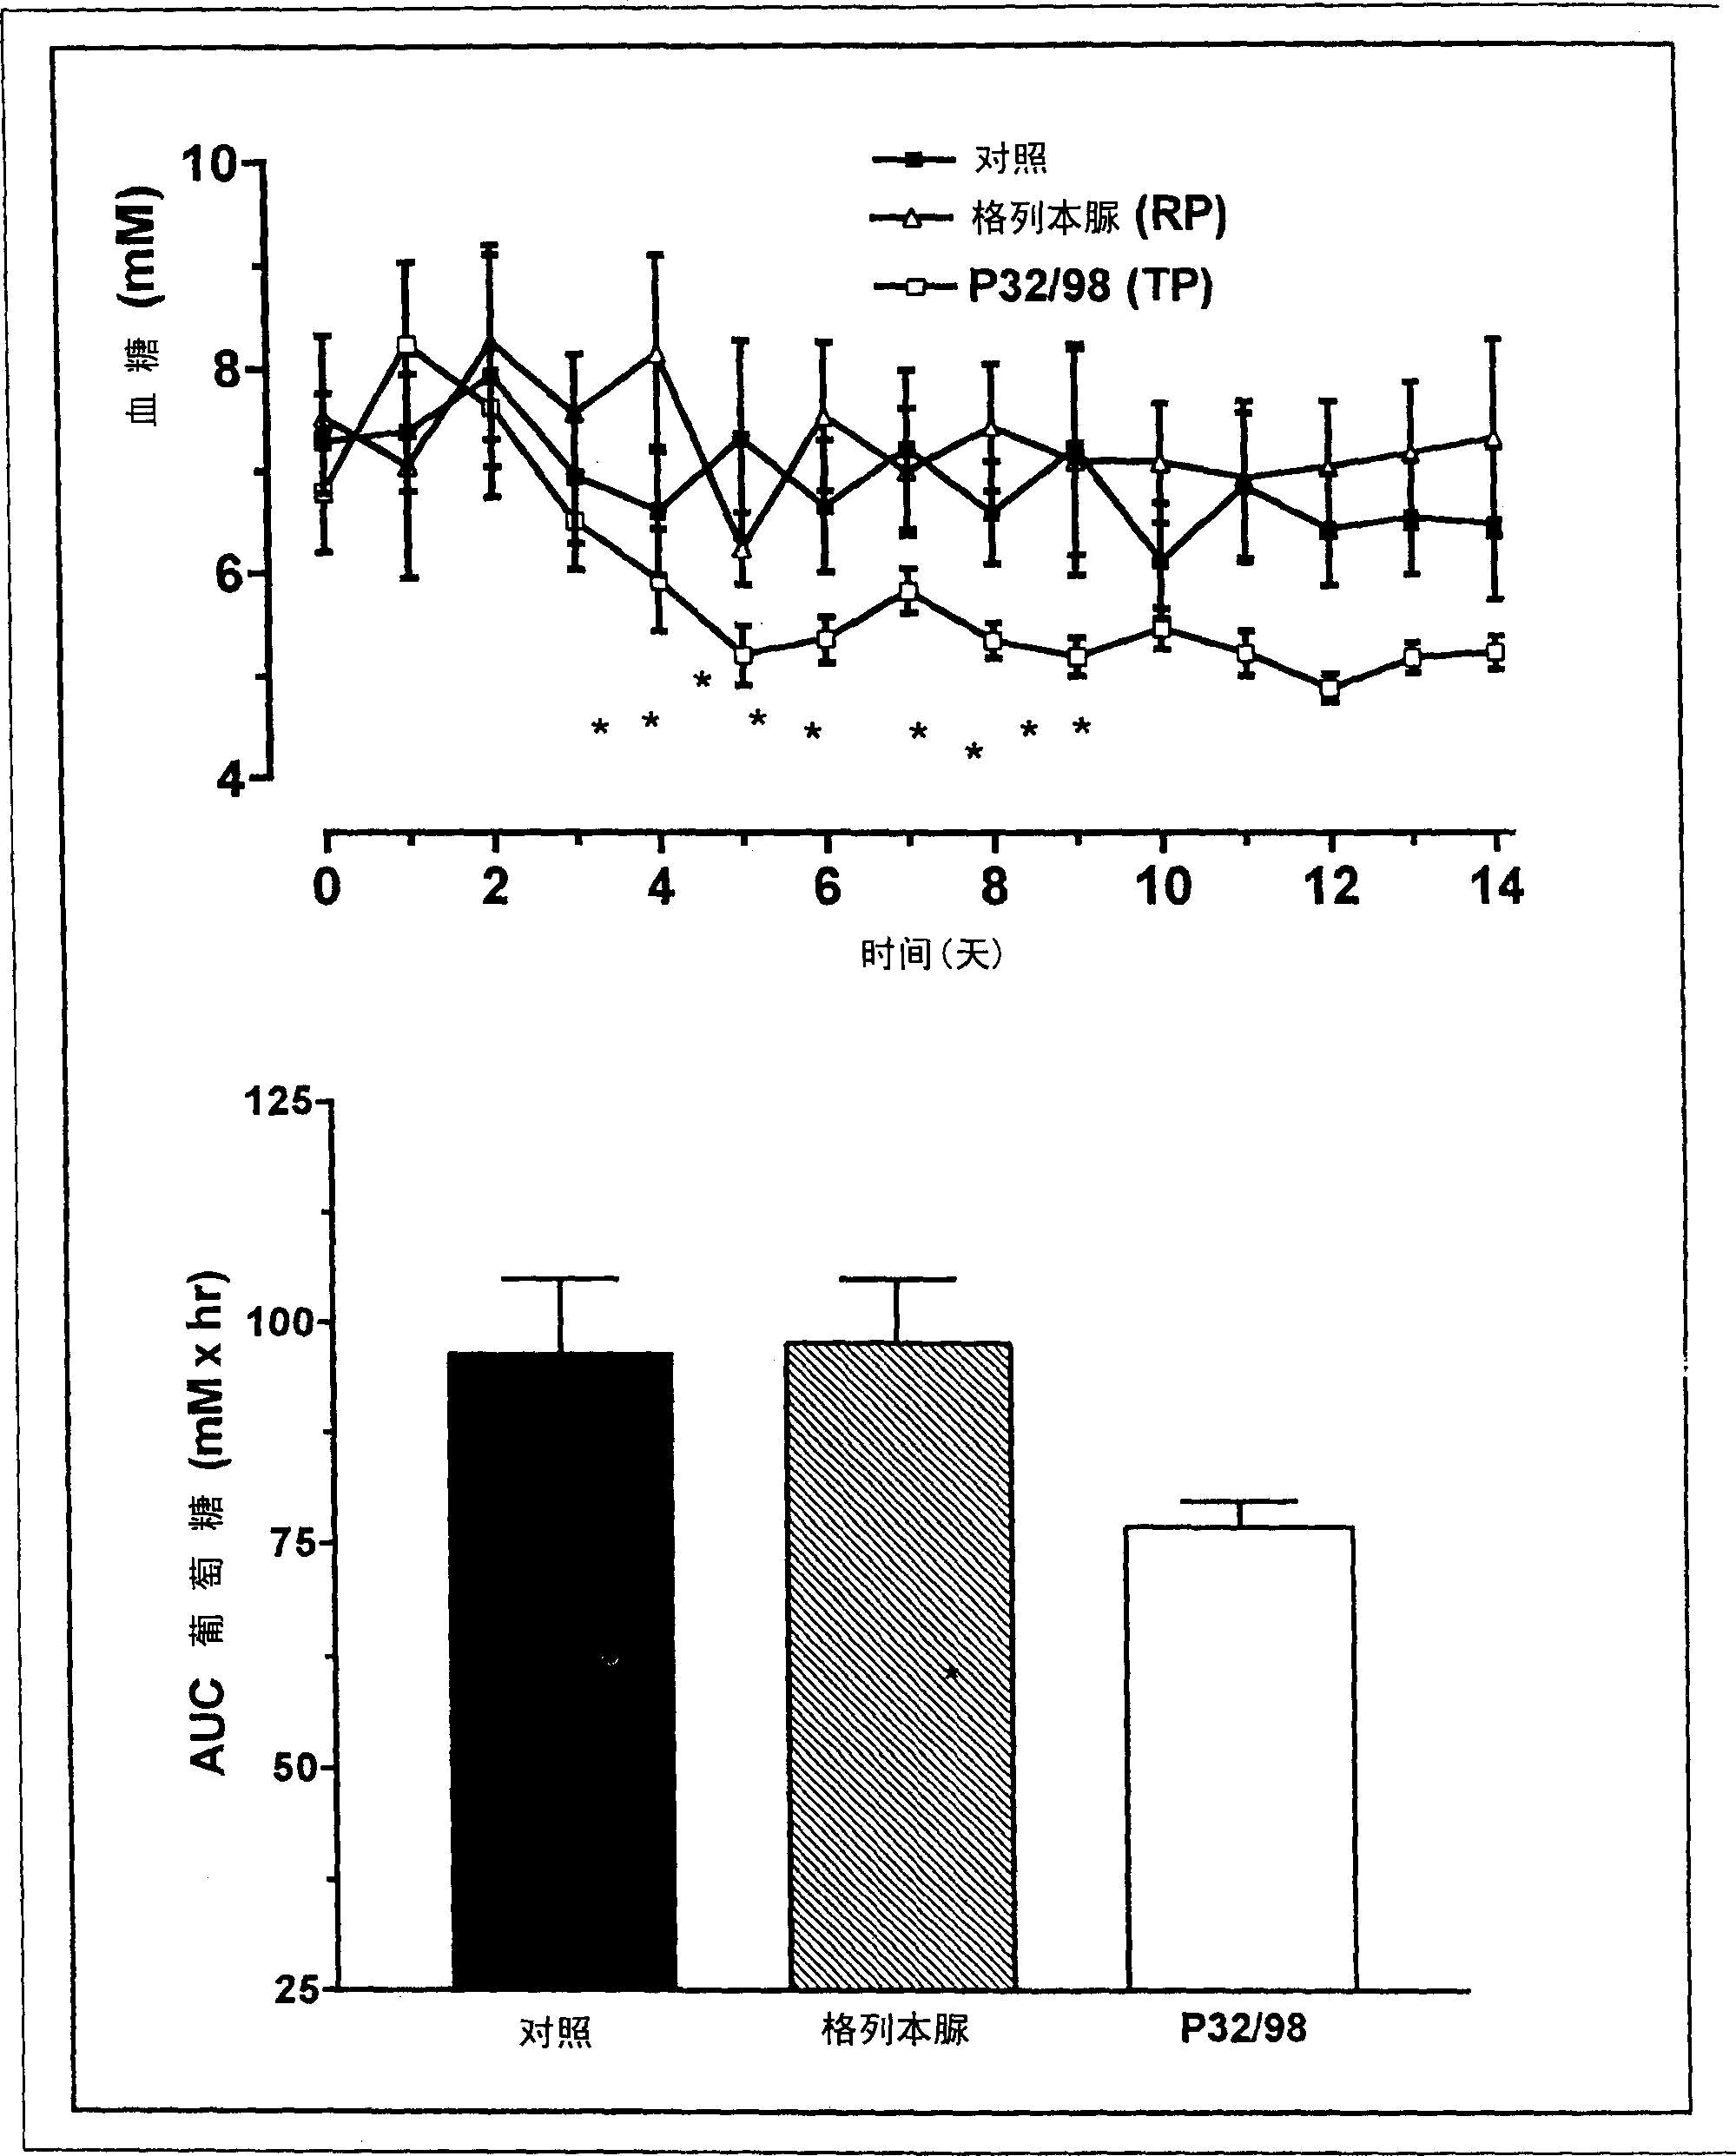 Method for improvement of islet signaling in diabetes mellitus and for its prevention